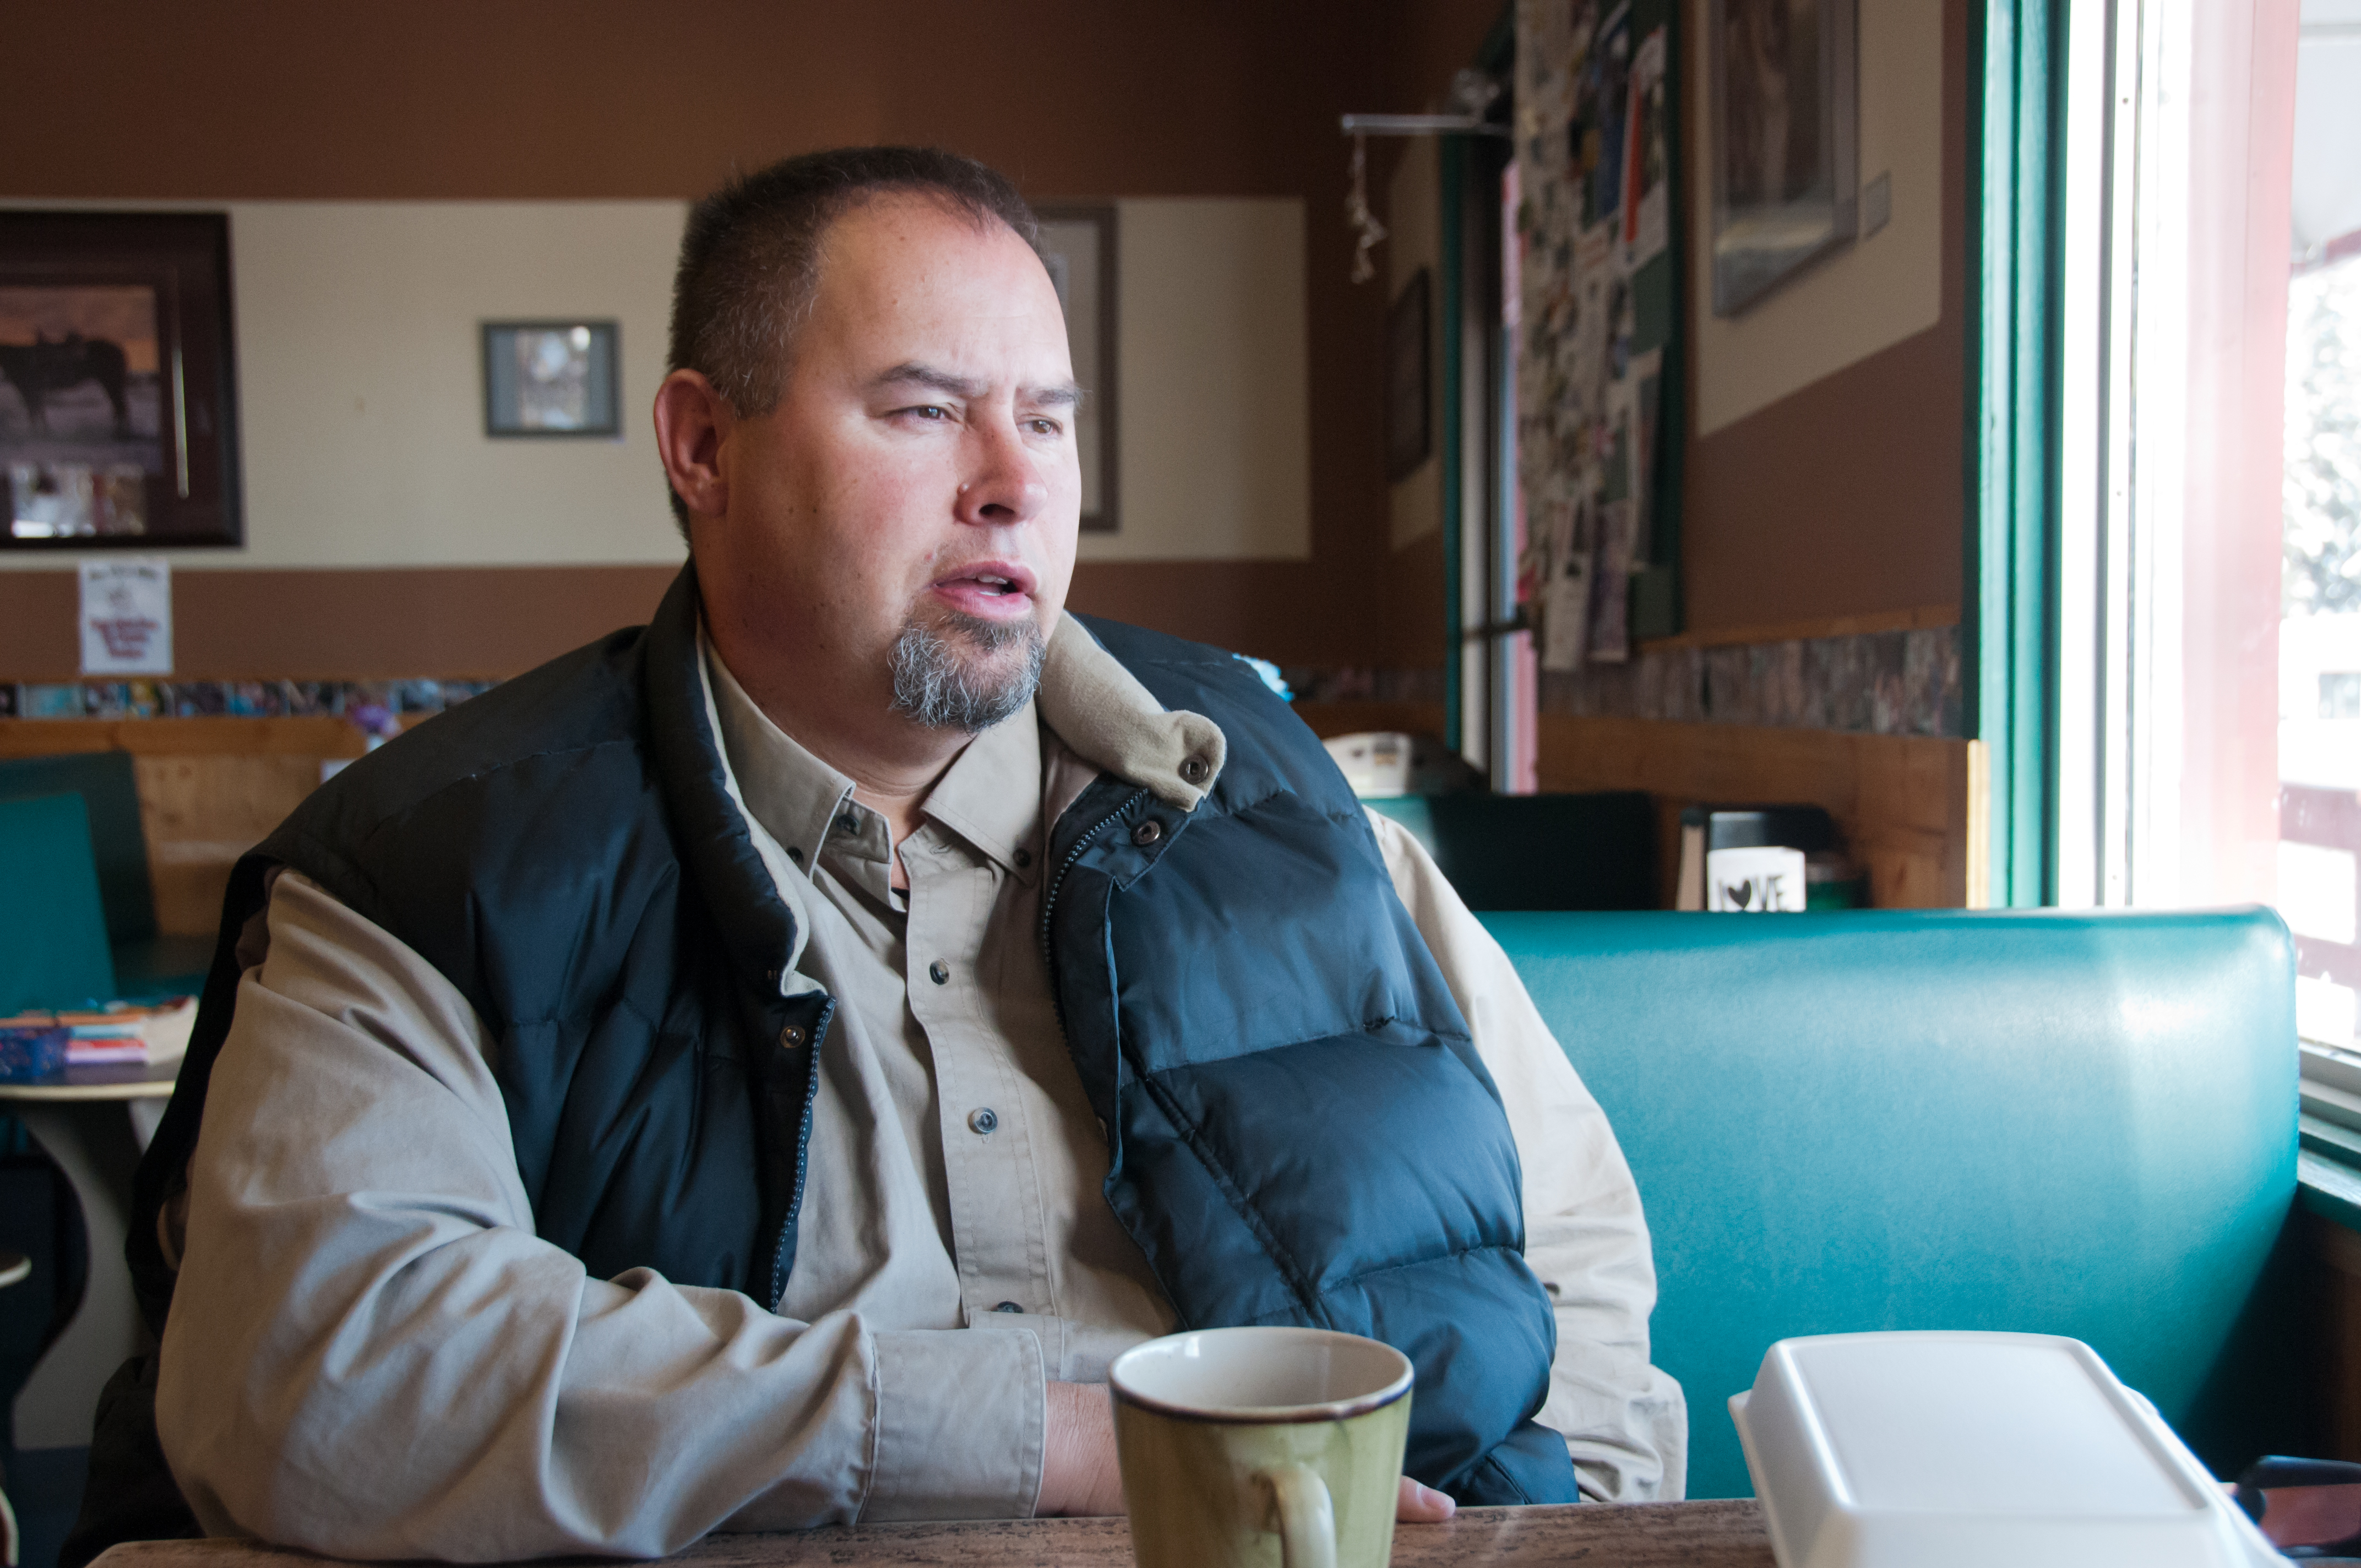 A man sits at a booth in a diner on a turquoise banquette. He has short dark hair, a goatee and is wearing a light brown button-down shirt and a black down vest.